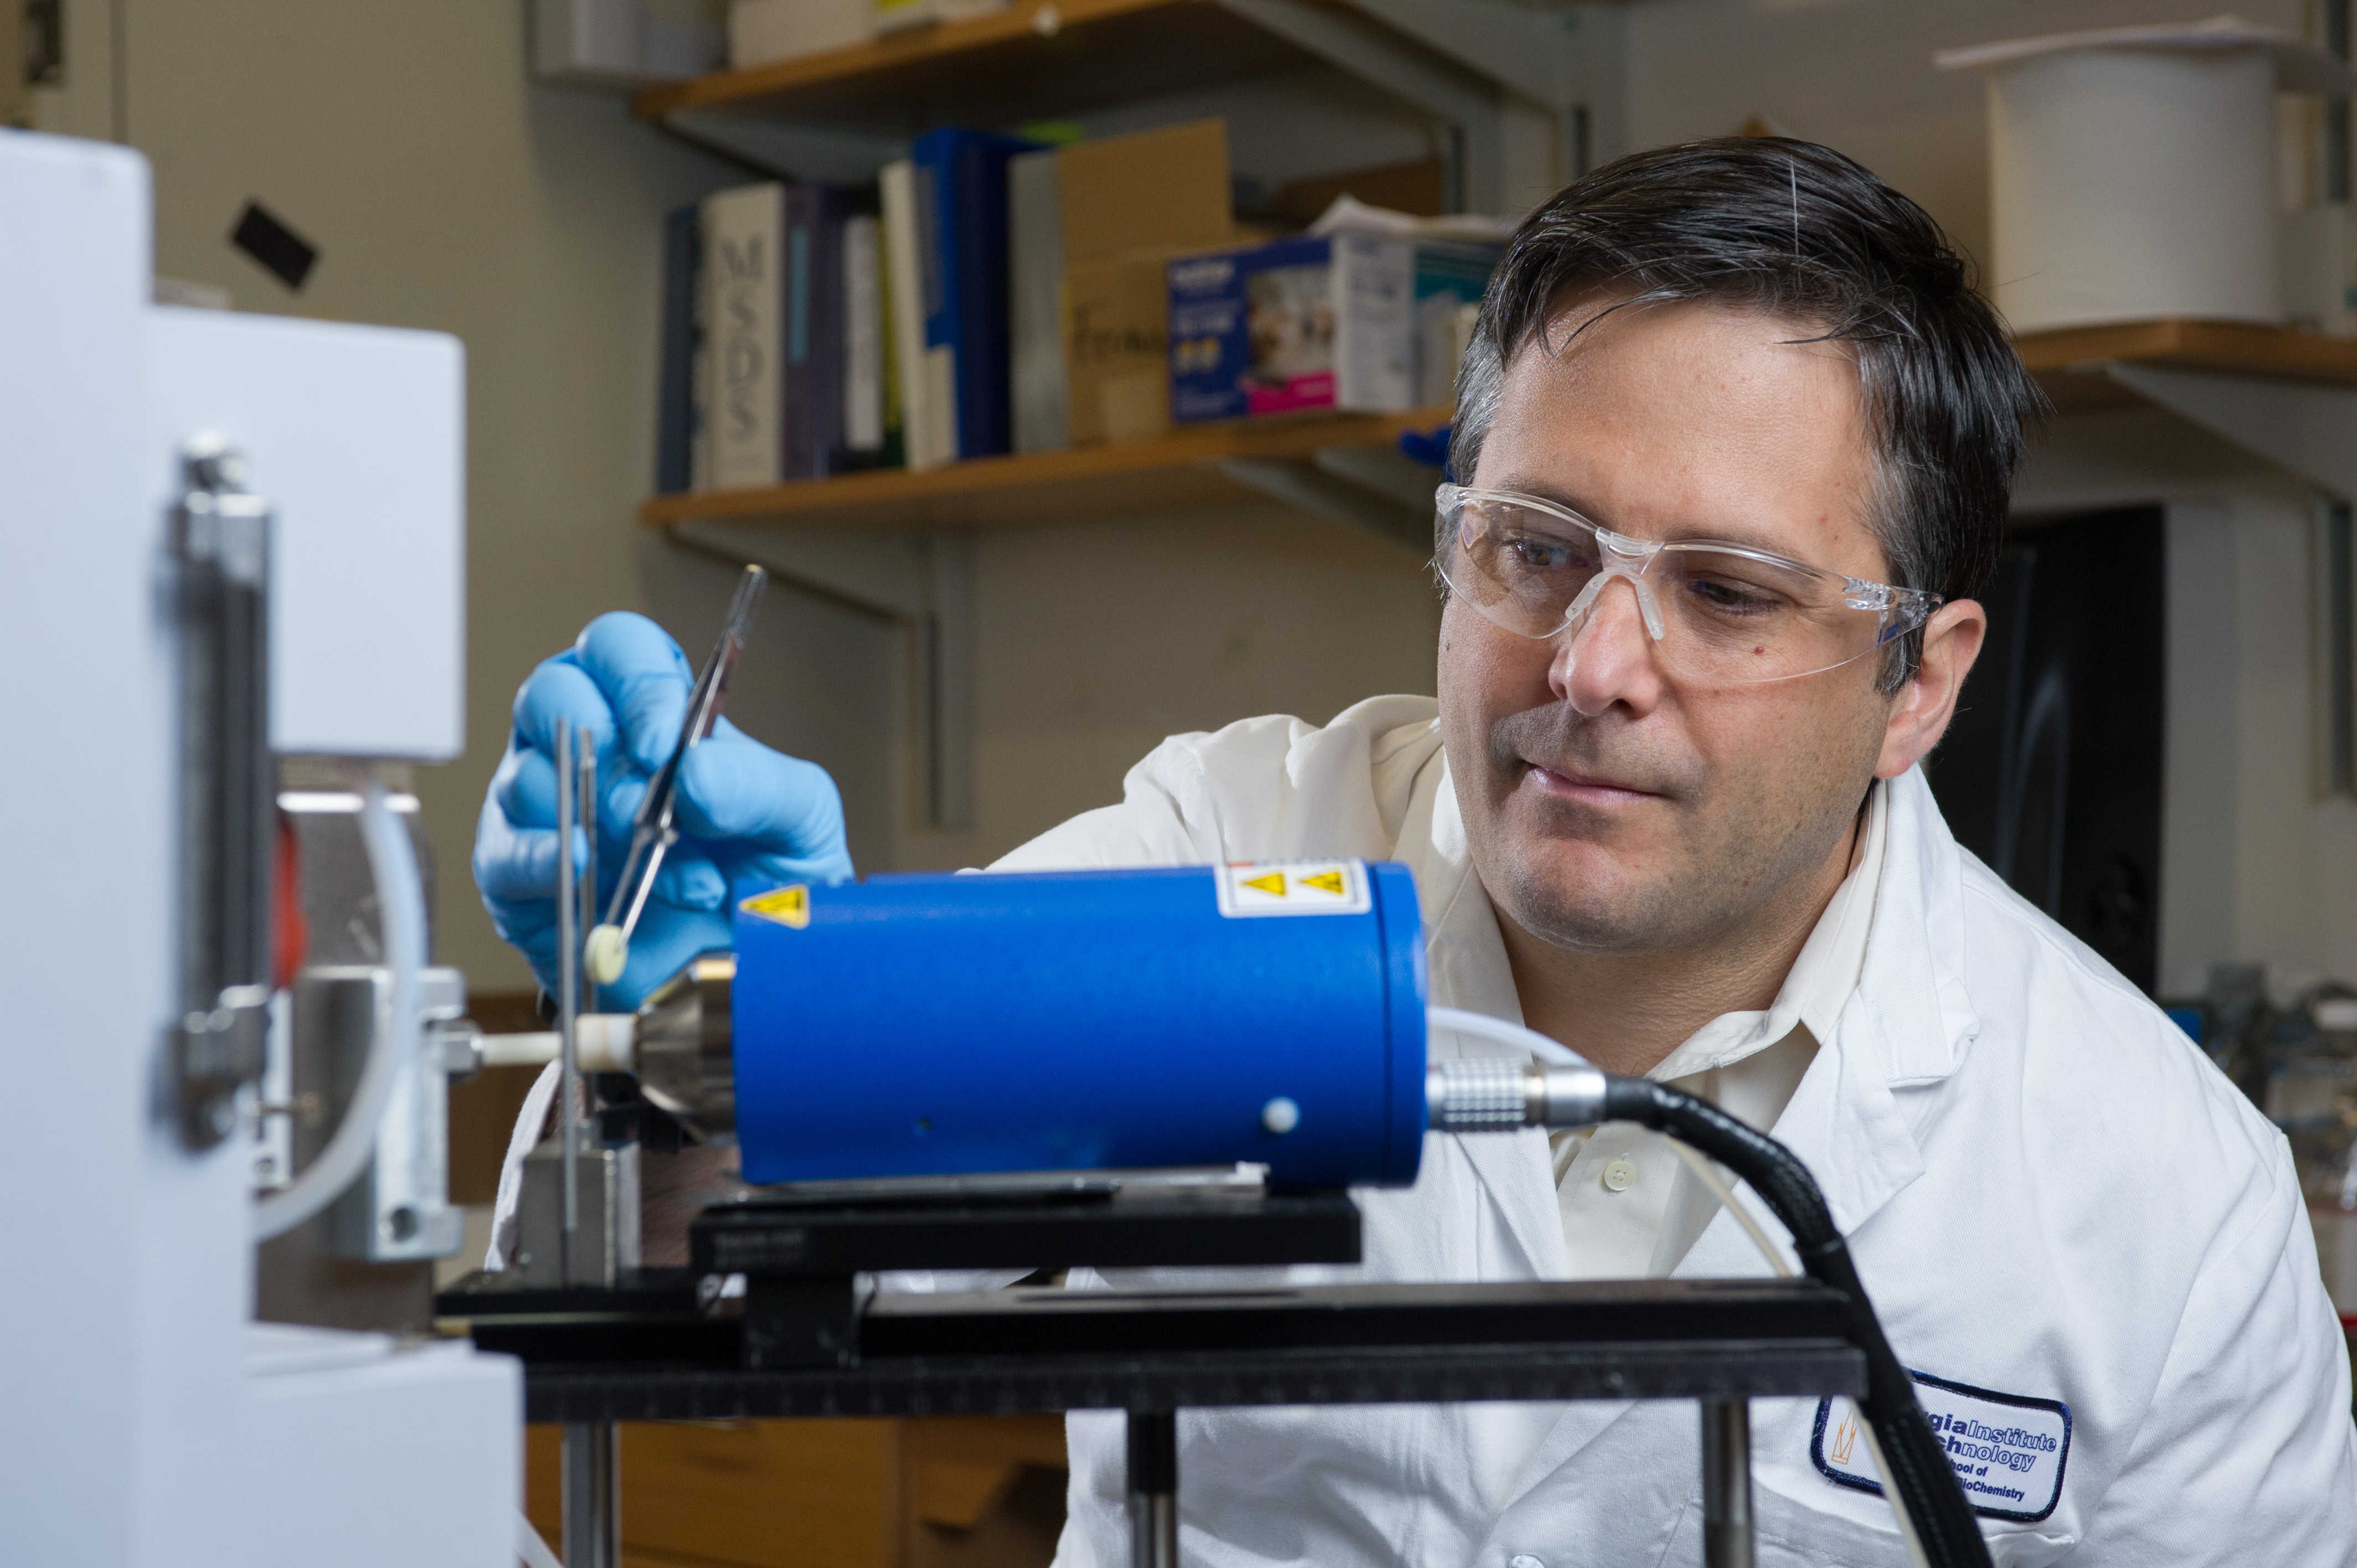 Facundo M. Fernández, a professor in the School of Chemistry and Biochemistry, examines an emergency contraceptive pill with ambient mass spectrometry.